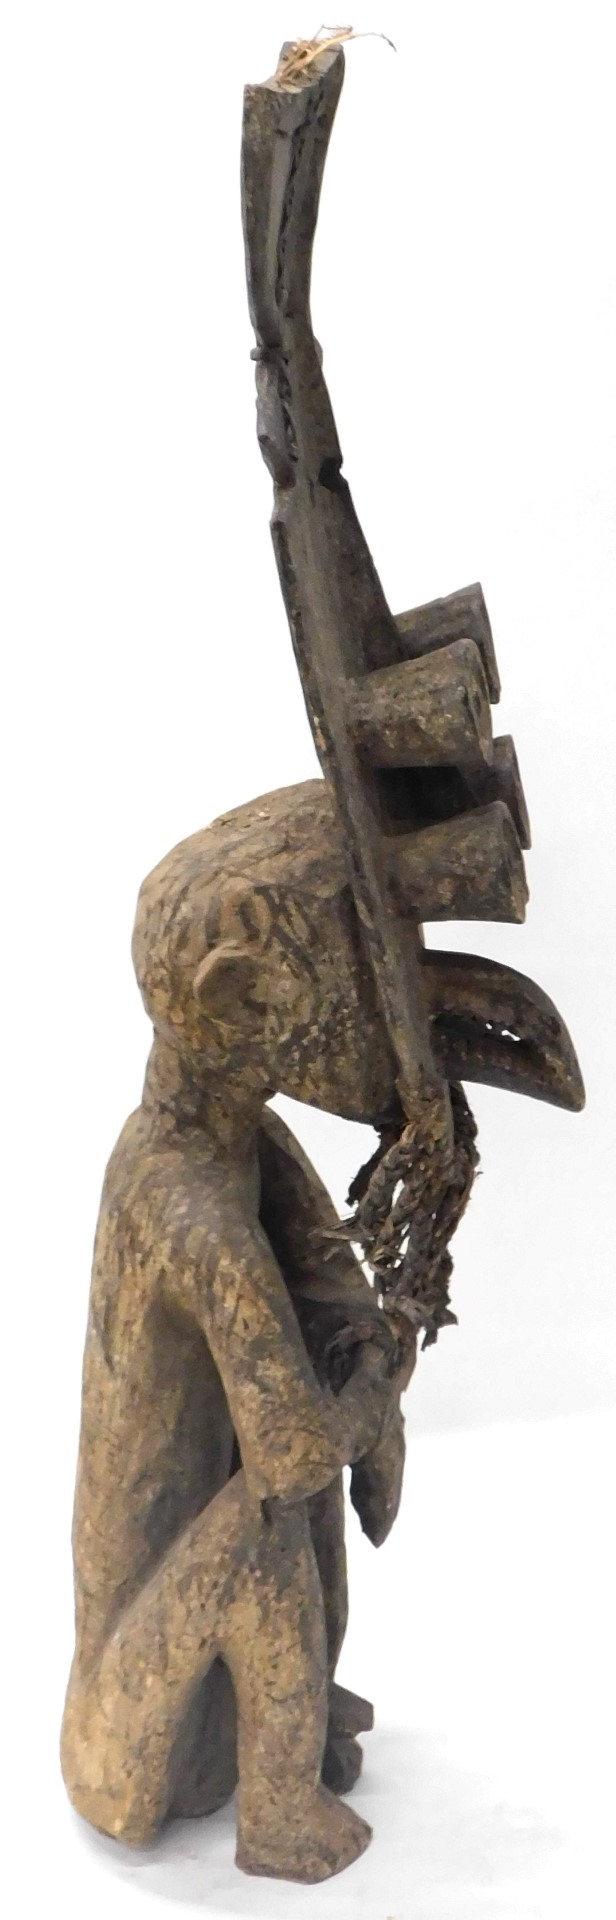 A Grebo (Kru) warrior funeral figure, Liberia, with certificate, 124cm high. - Image 4 of 5